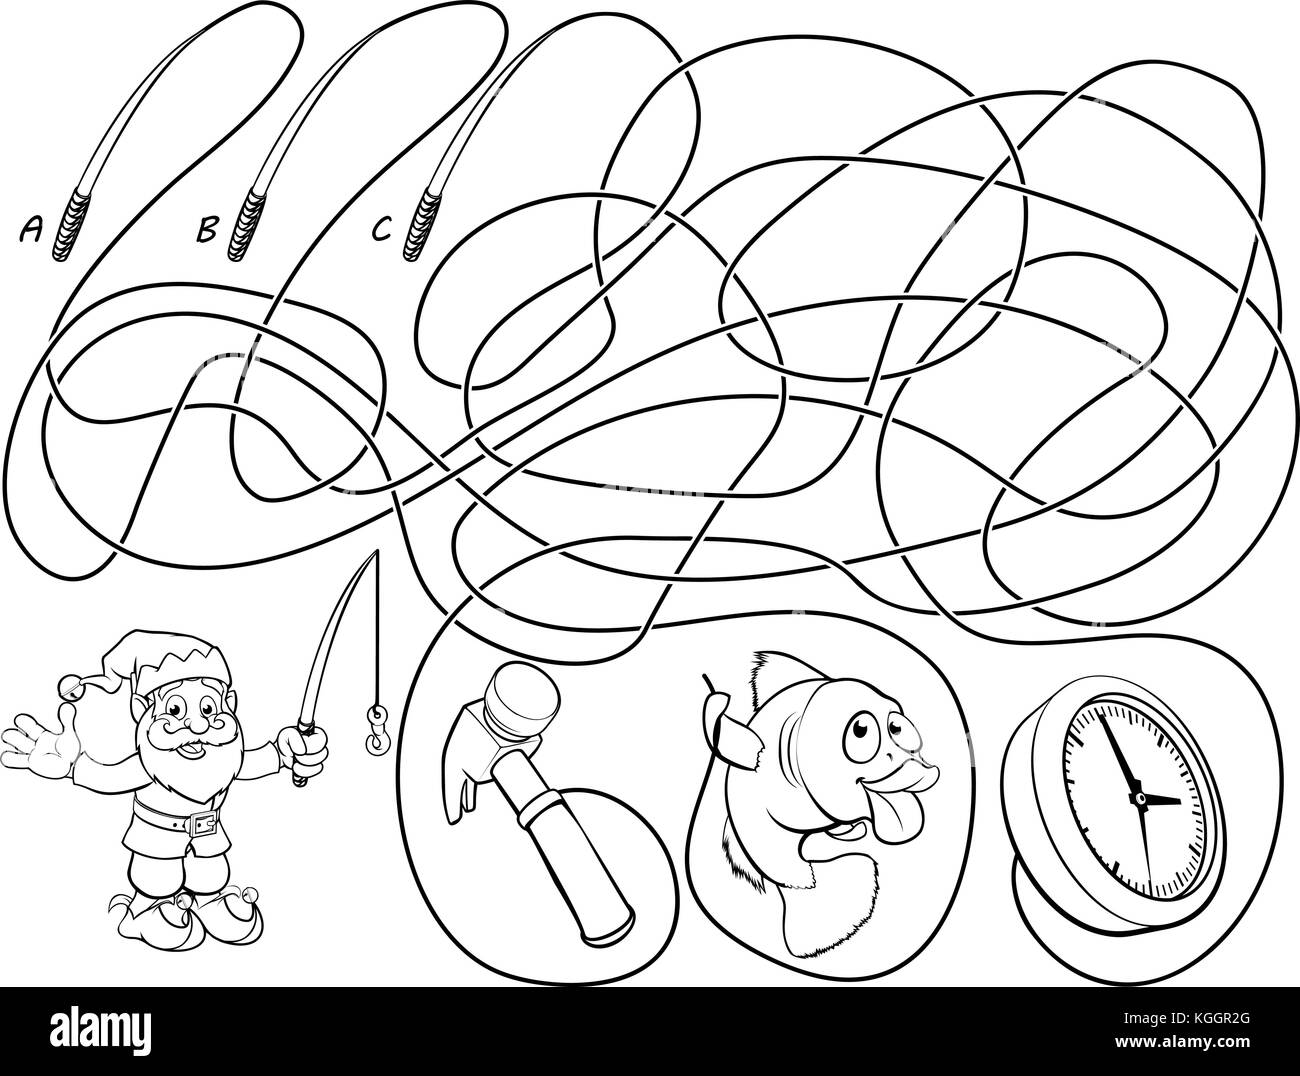 Maze Lines Childrens Game Stock Vector